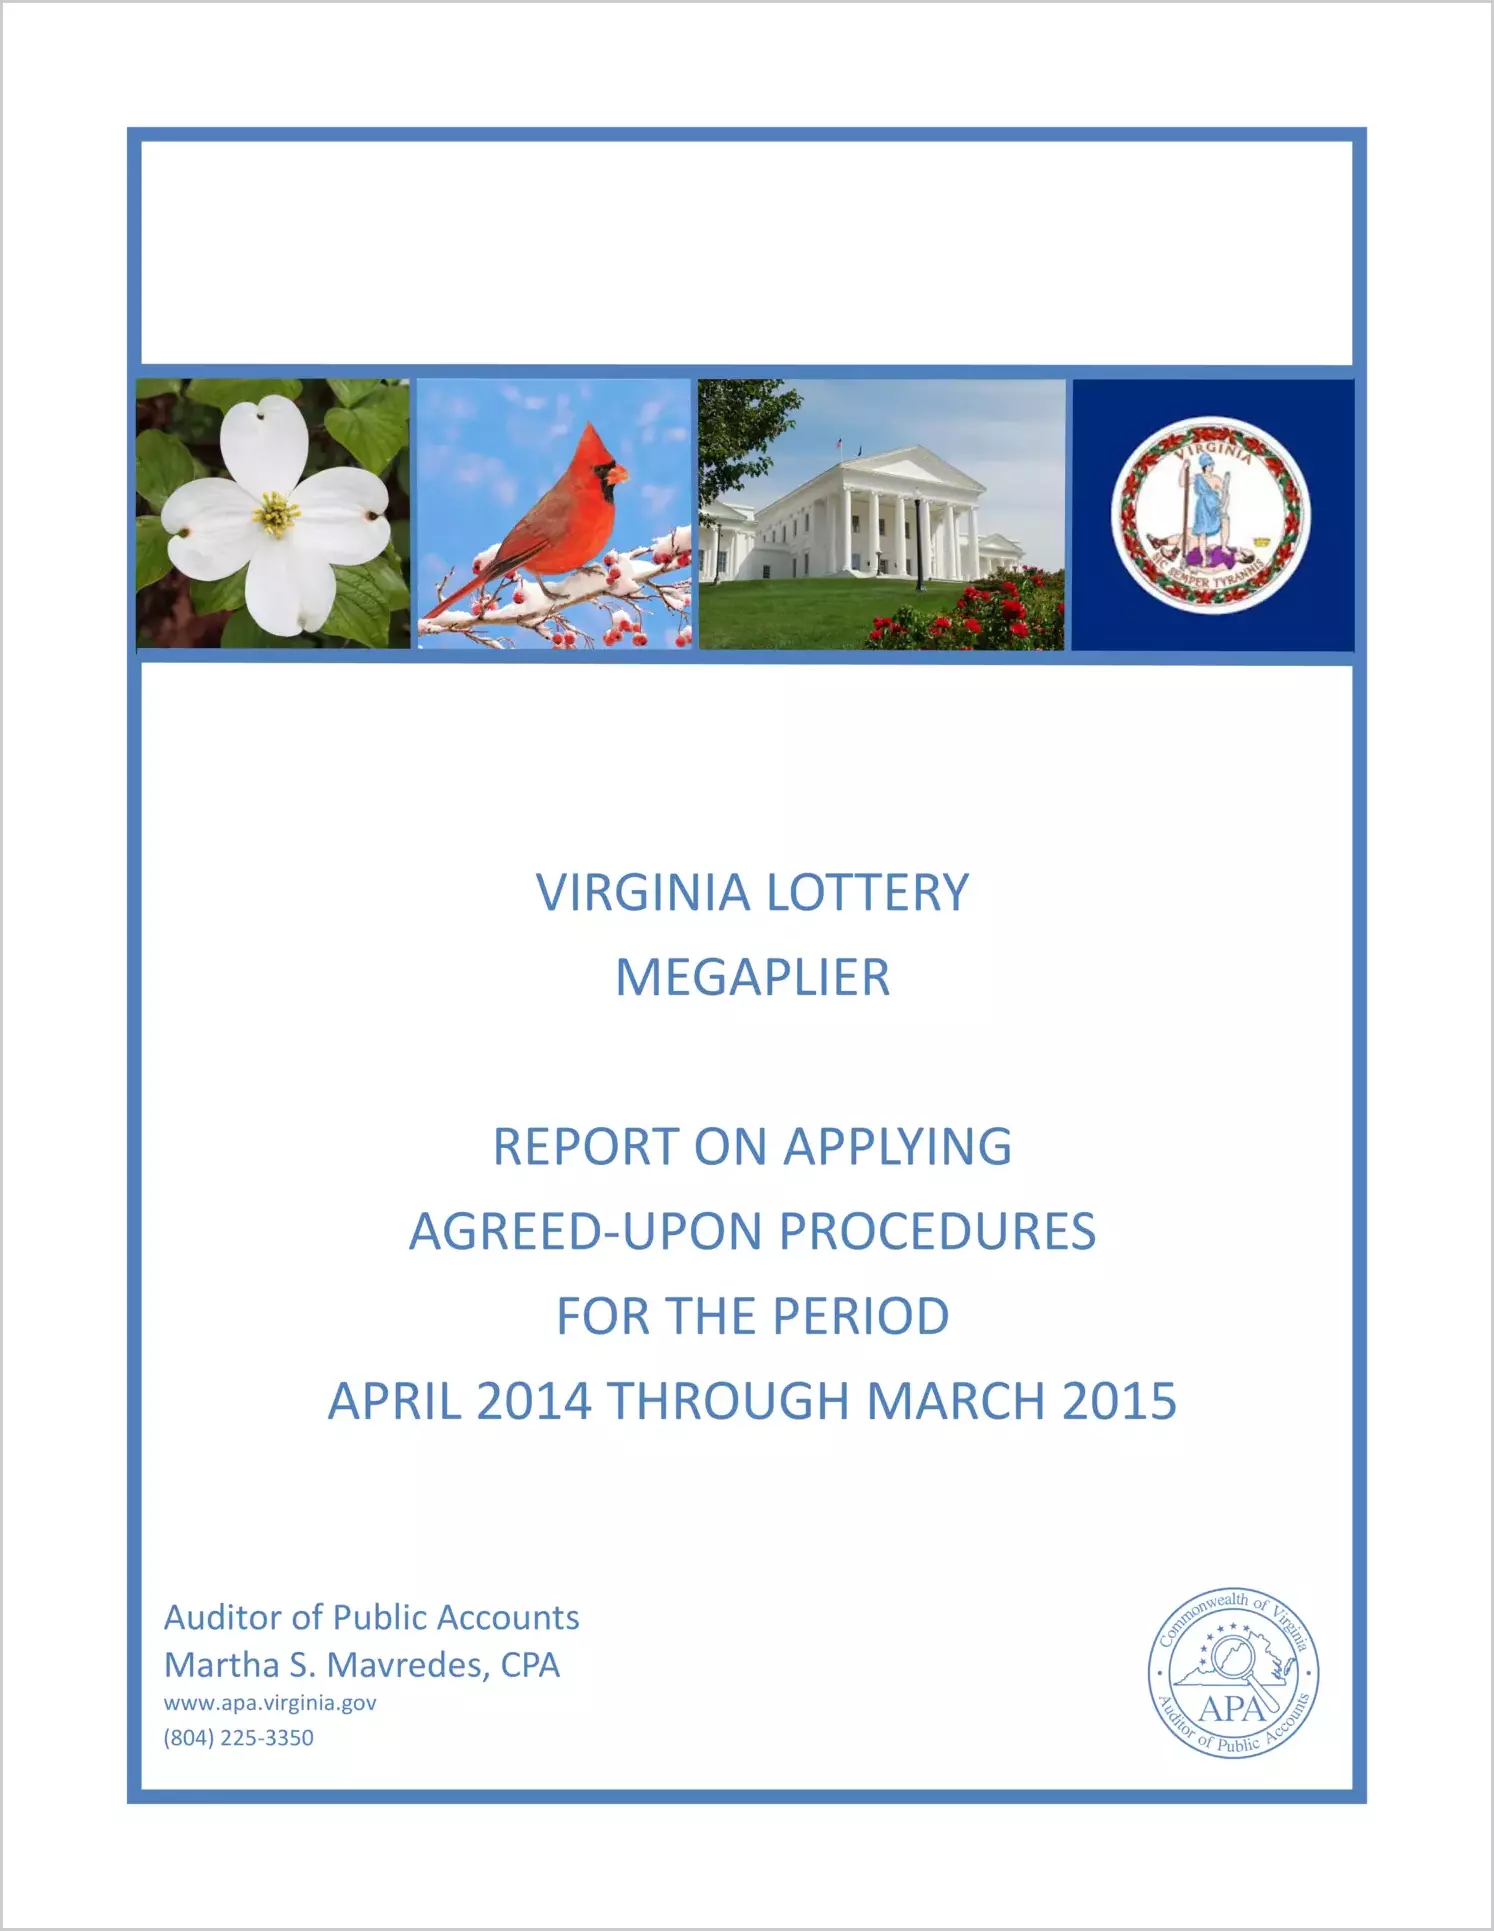 VA Lottery Megaplier report on Applying Agreed-Upon Procedures for the period April, 2014 through March, 2015